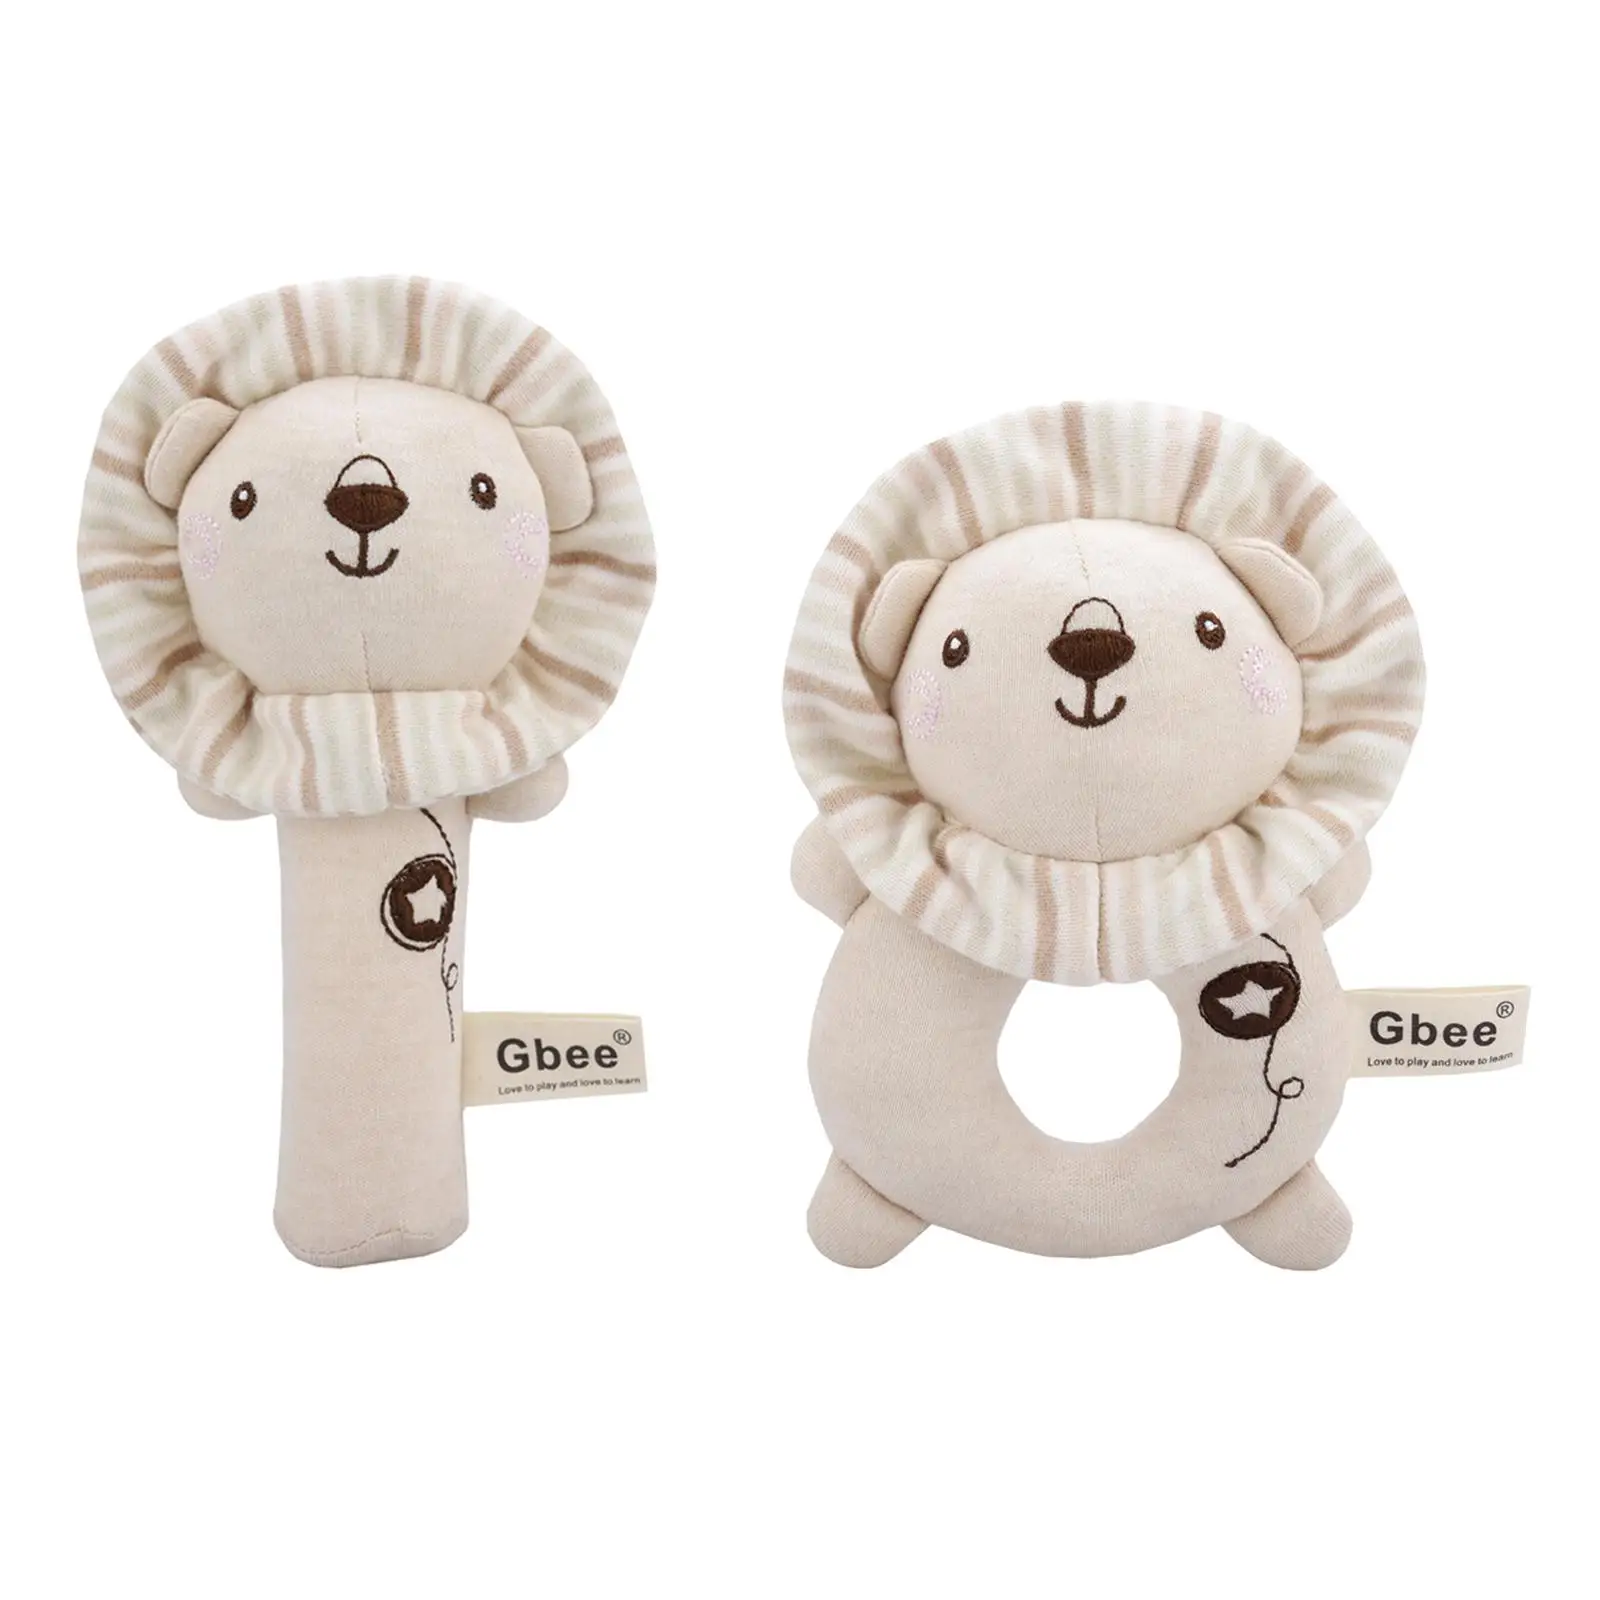 2 Pieces Animal-Shaped Infant Rattles Shaker handheld grip Toys Handheld Rattles Squeakers Stuffed for   Newborn